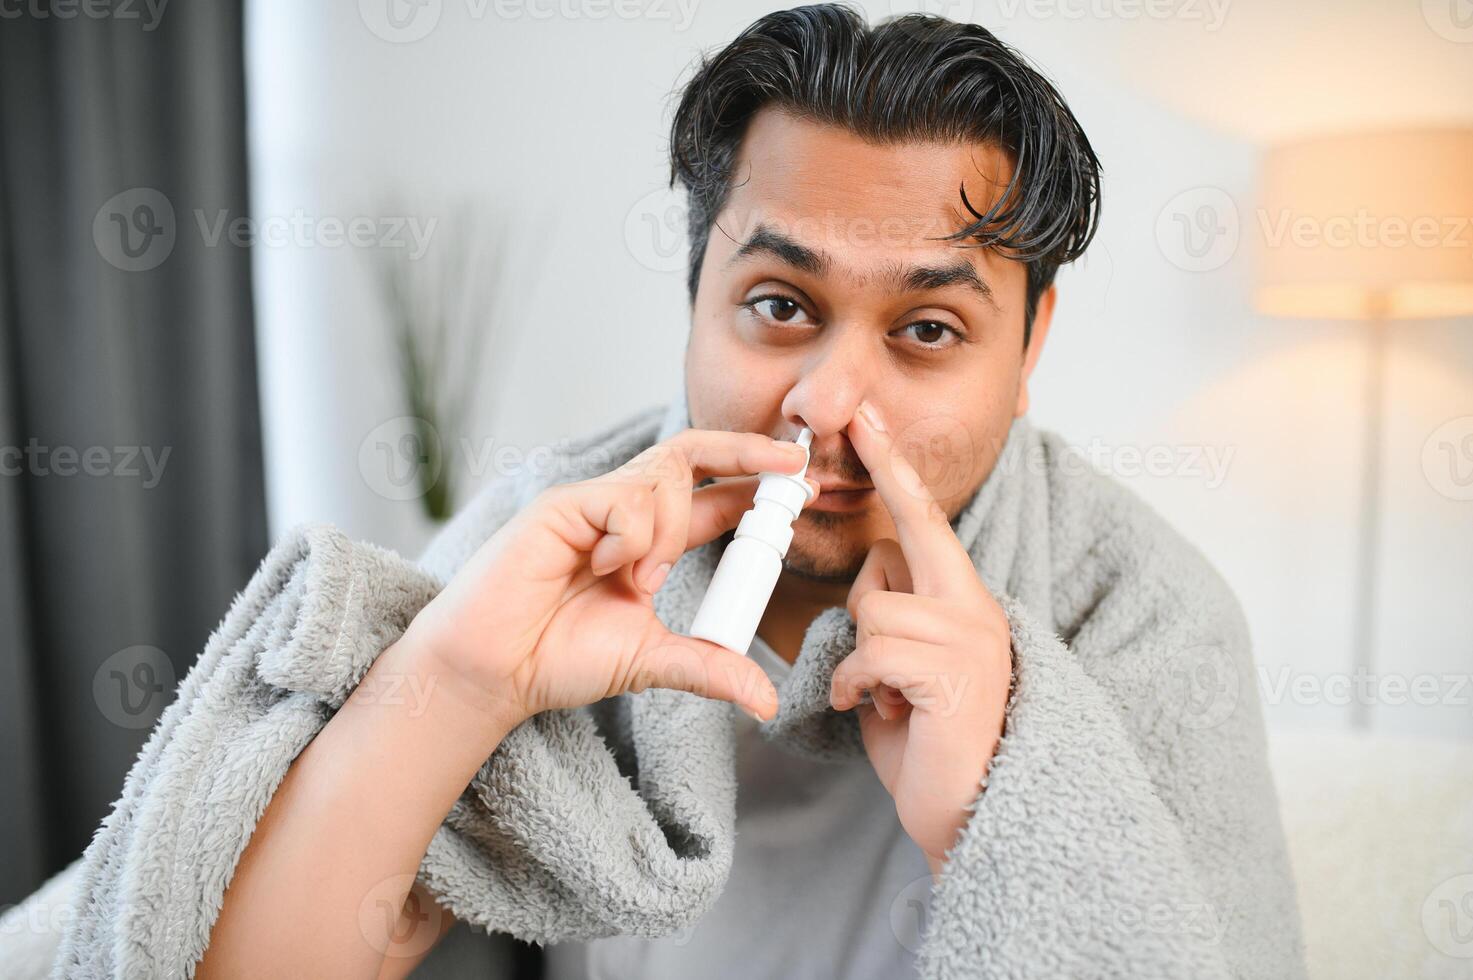 A sick Indian is treated at home and uses a nasal spray. Healthcare concept photo